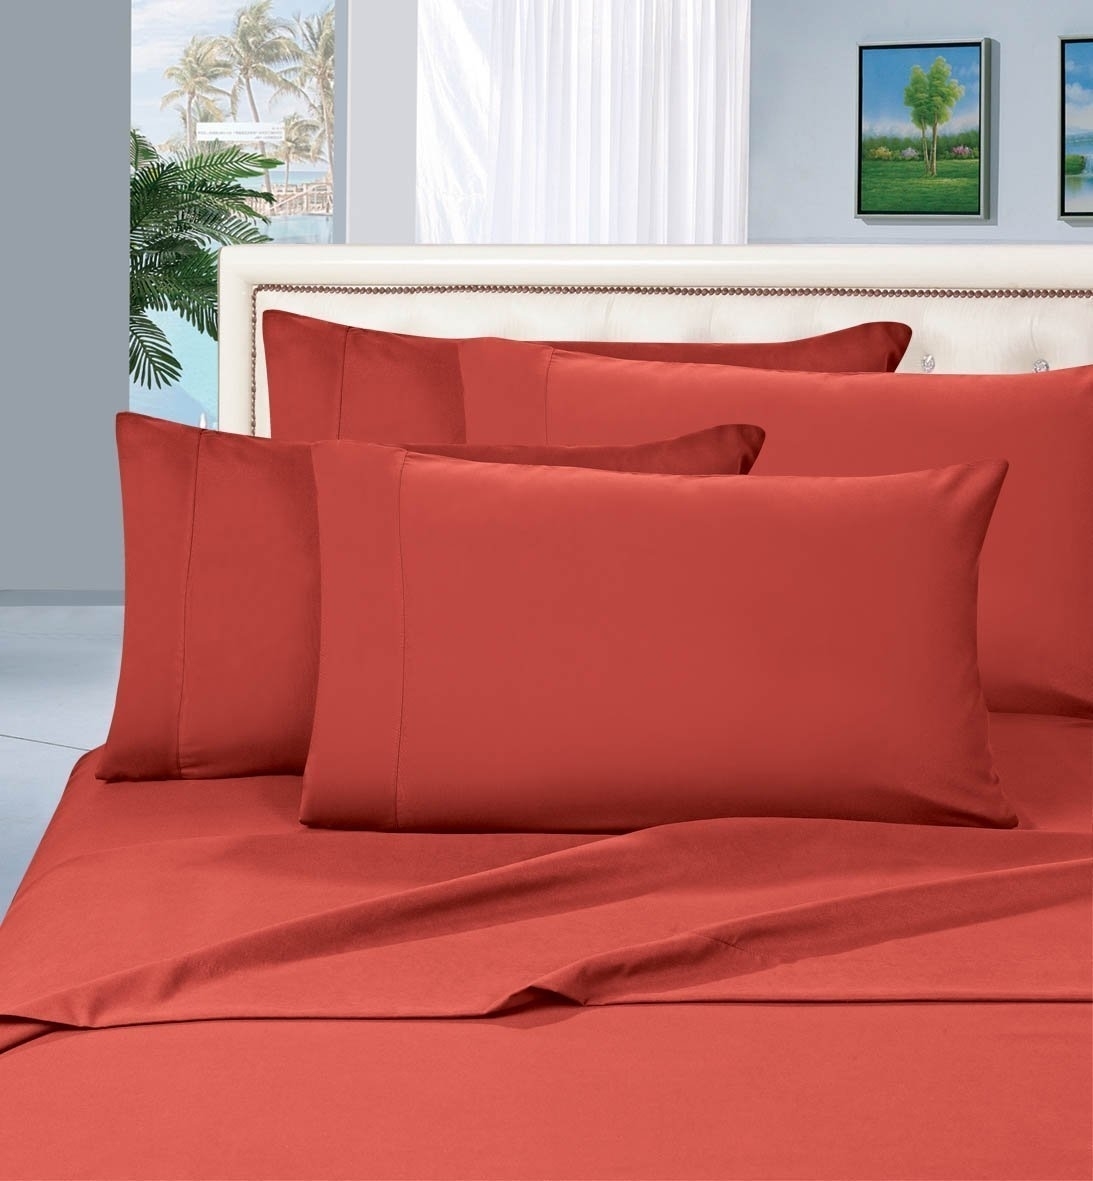 Elegant Comfort 1500 Series Wrinkle Resistant Egyptian Quality Hypoallergenic Ultra Soft Luxury 3-piece Bed Sheet Set, Twin, Rust